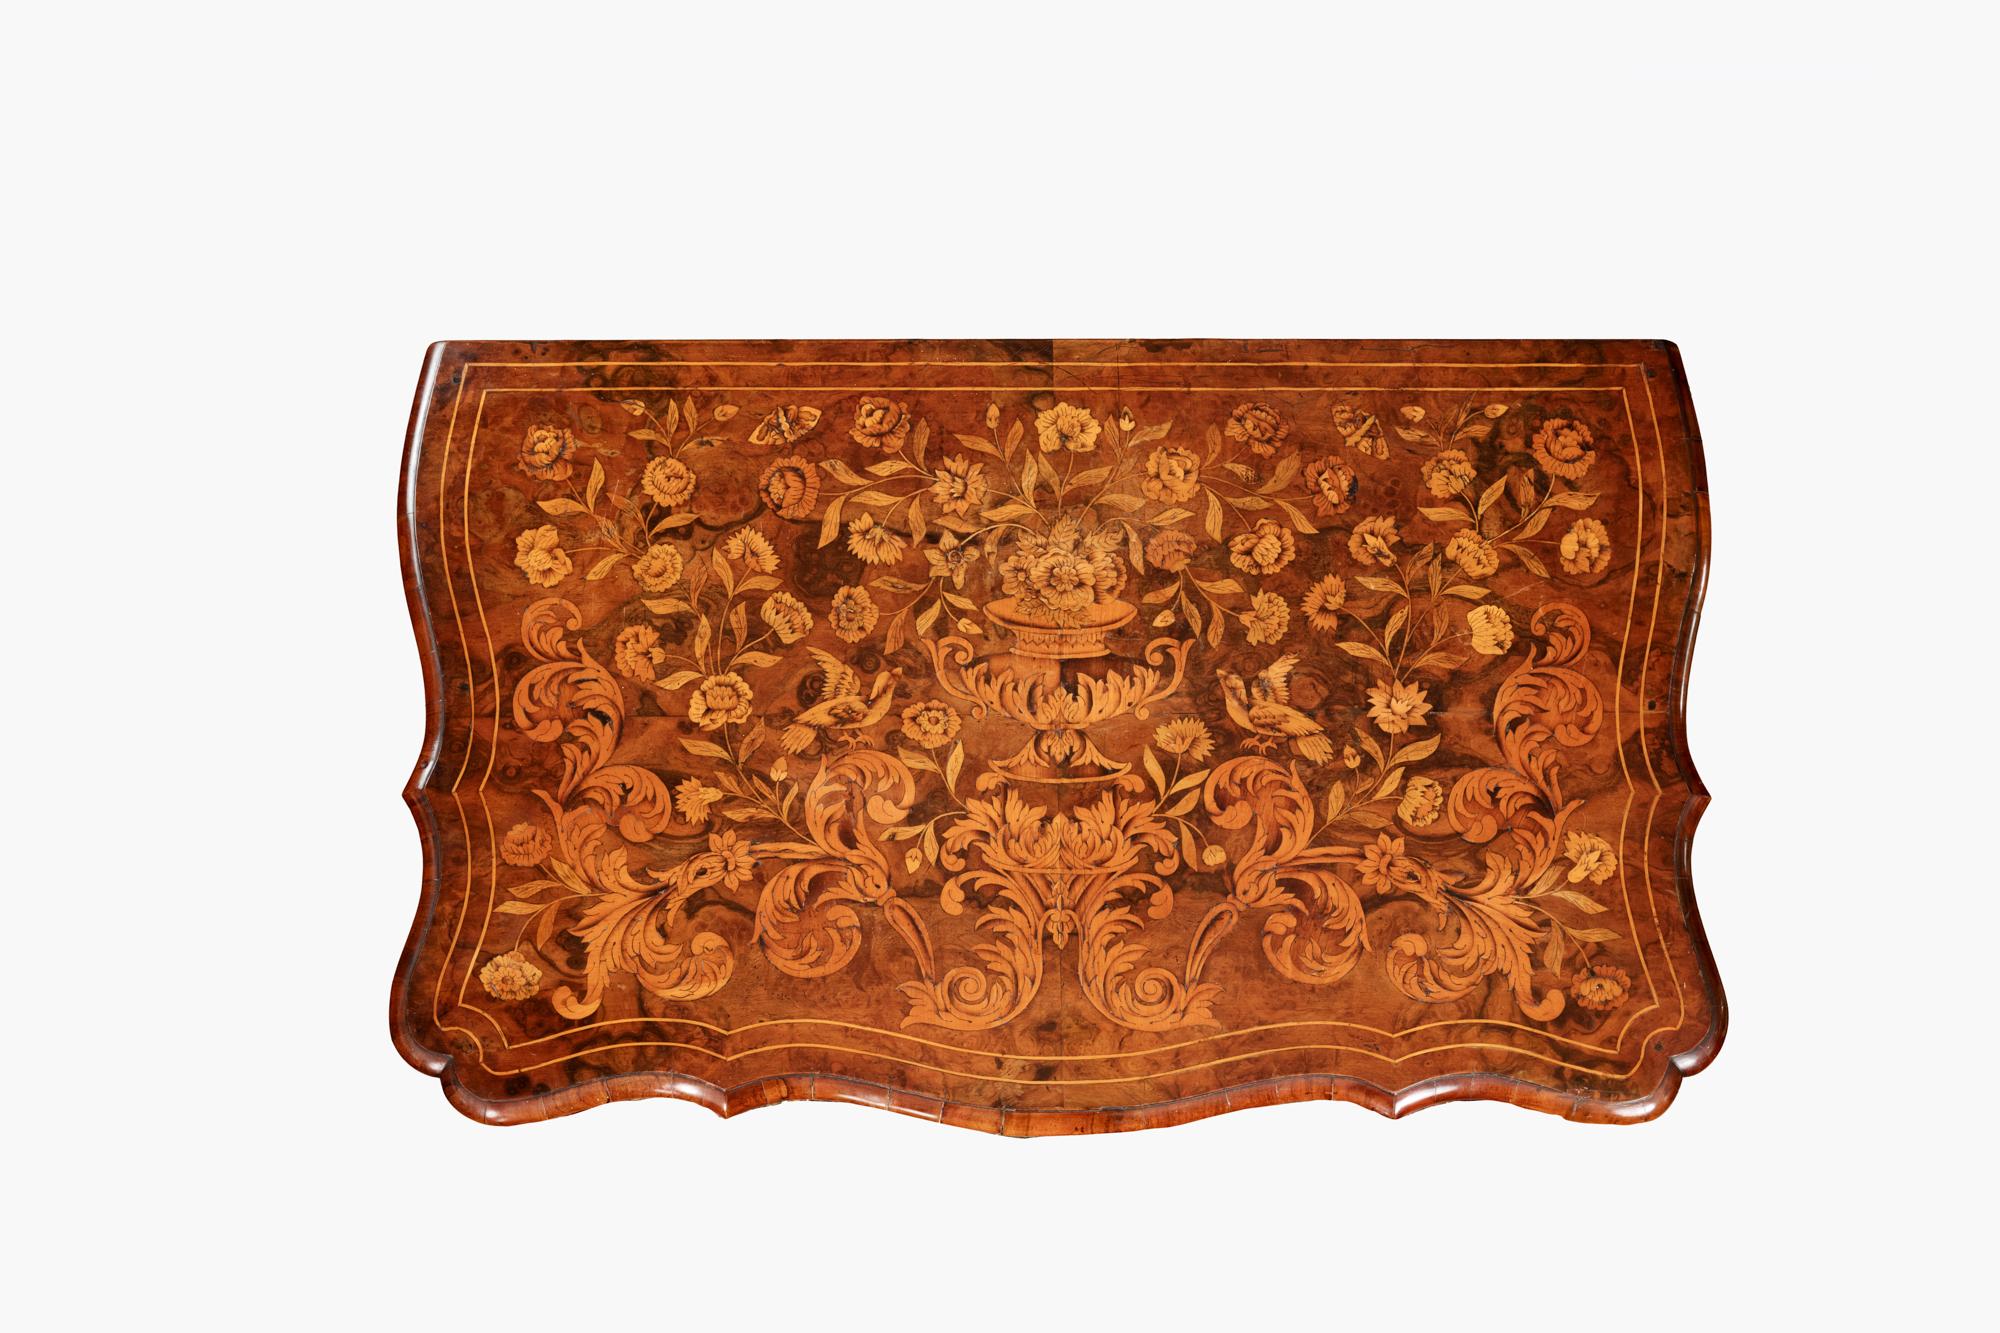 Early 19th Century neat sized Dutch walnut marquetry bombe chest, with serpentine front and canted corners. Elaborate floral marquetry inlay covers this entire piece with similar floral whiplash designs applied to the brass handles and escutcheons